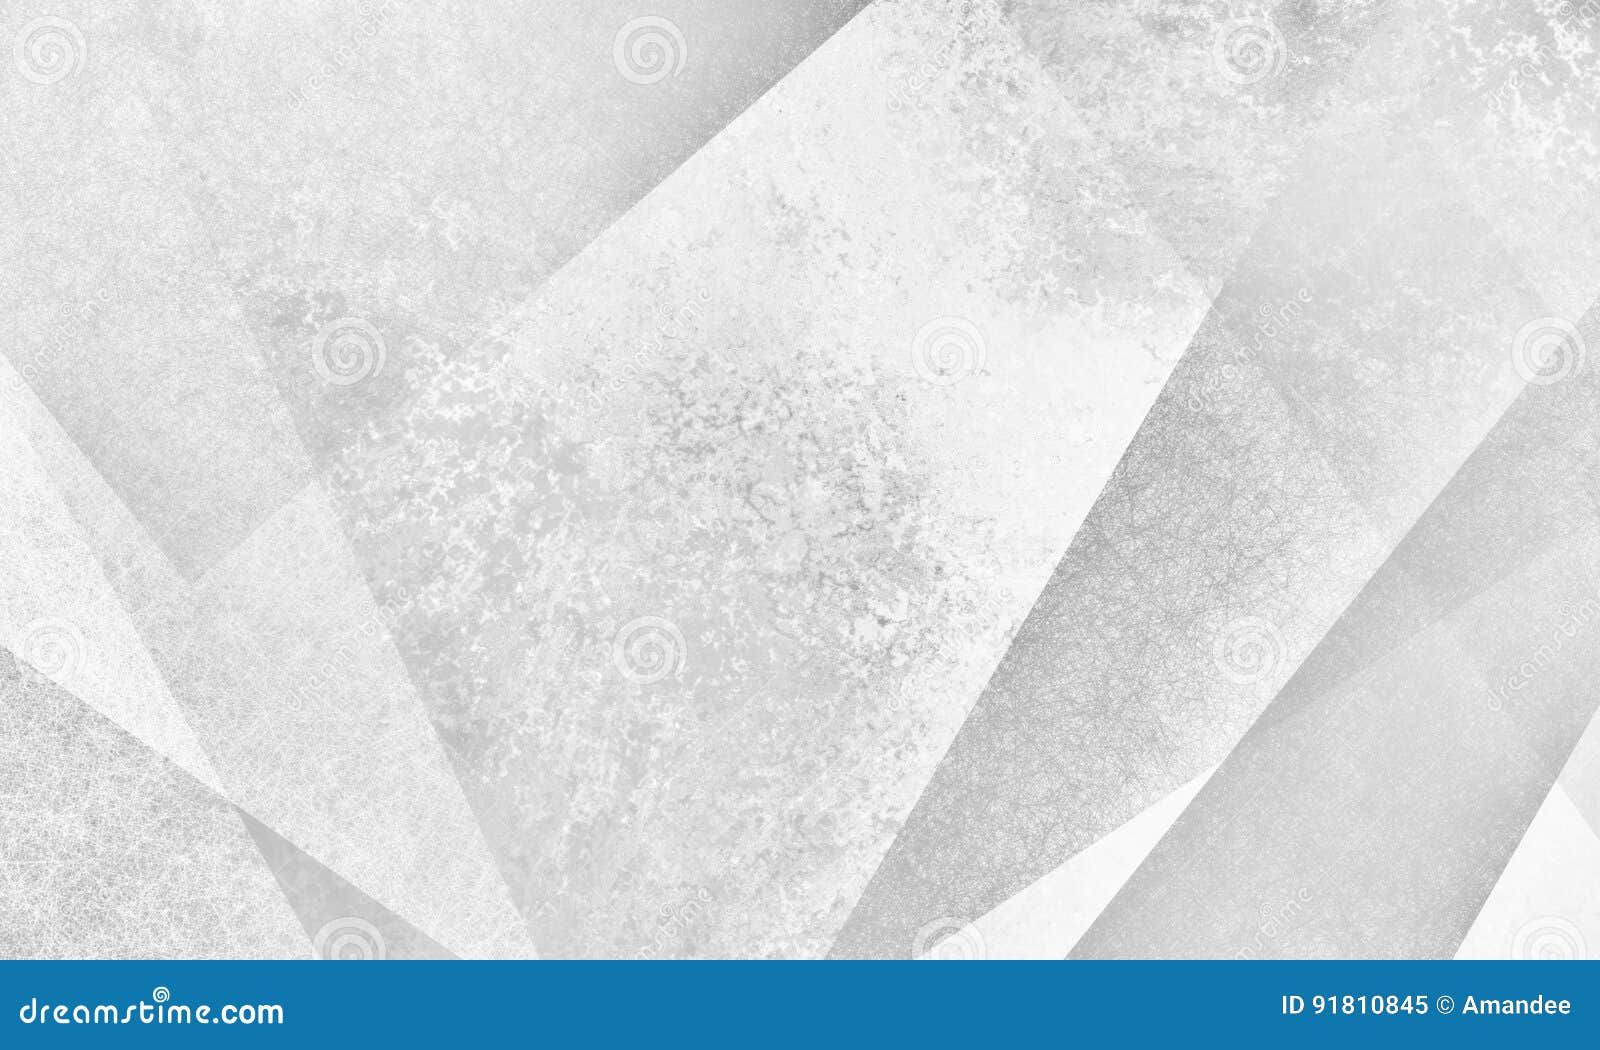 abstract white background  with modern angles and layer s with gray grunge texture